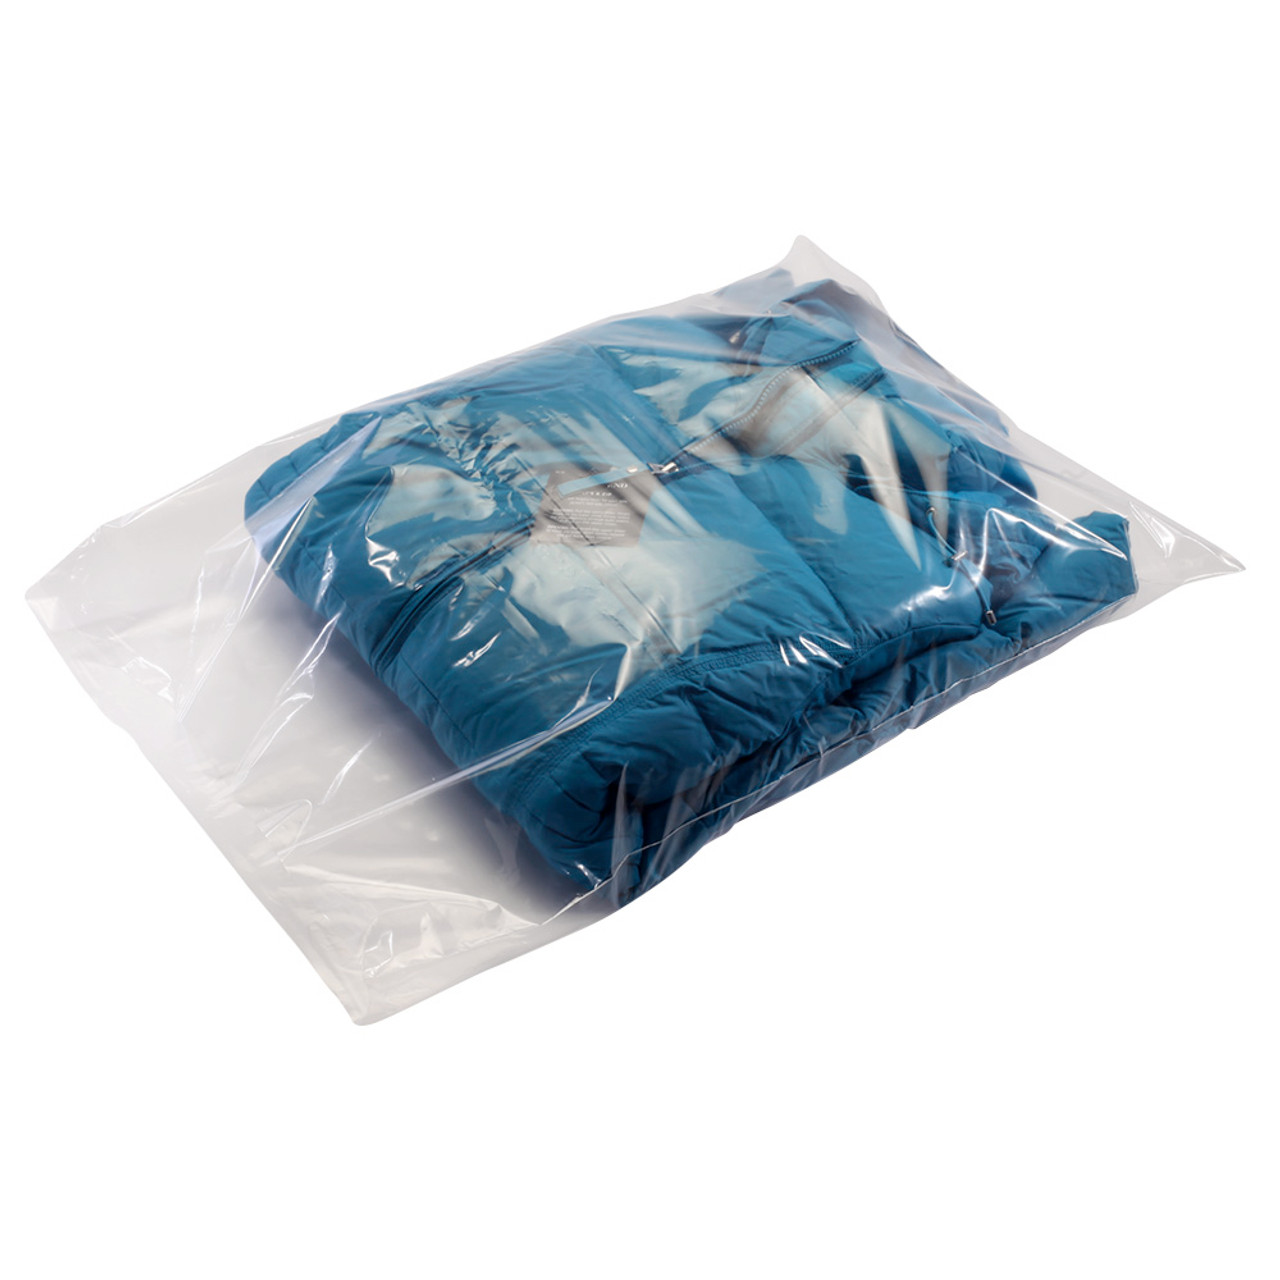 2X10 - 1.5 mil - clear - layflat poly bags - 1000 bags/case